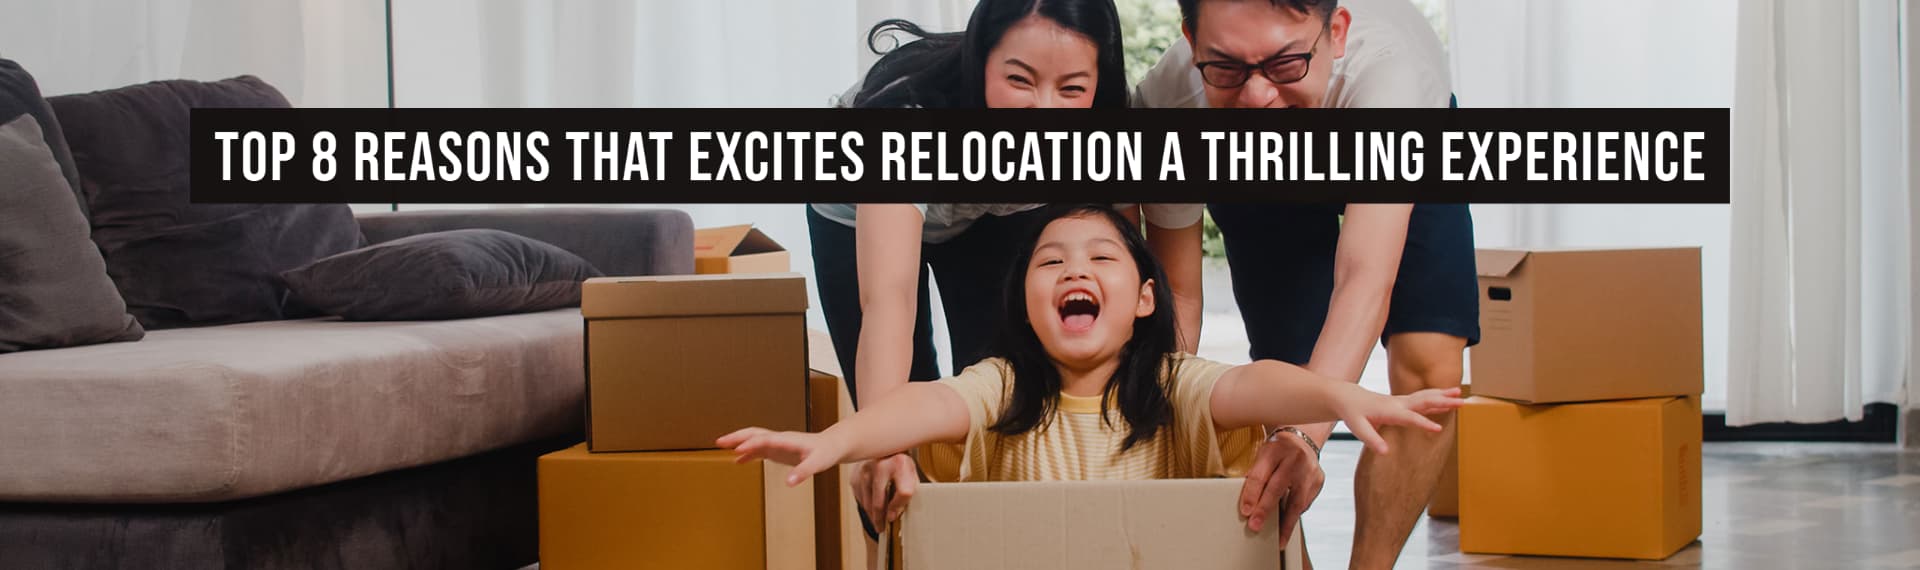 Top 8 Reasons That Excite Relocation A Thrilling Experience